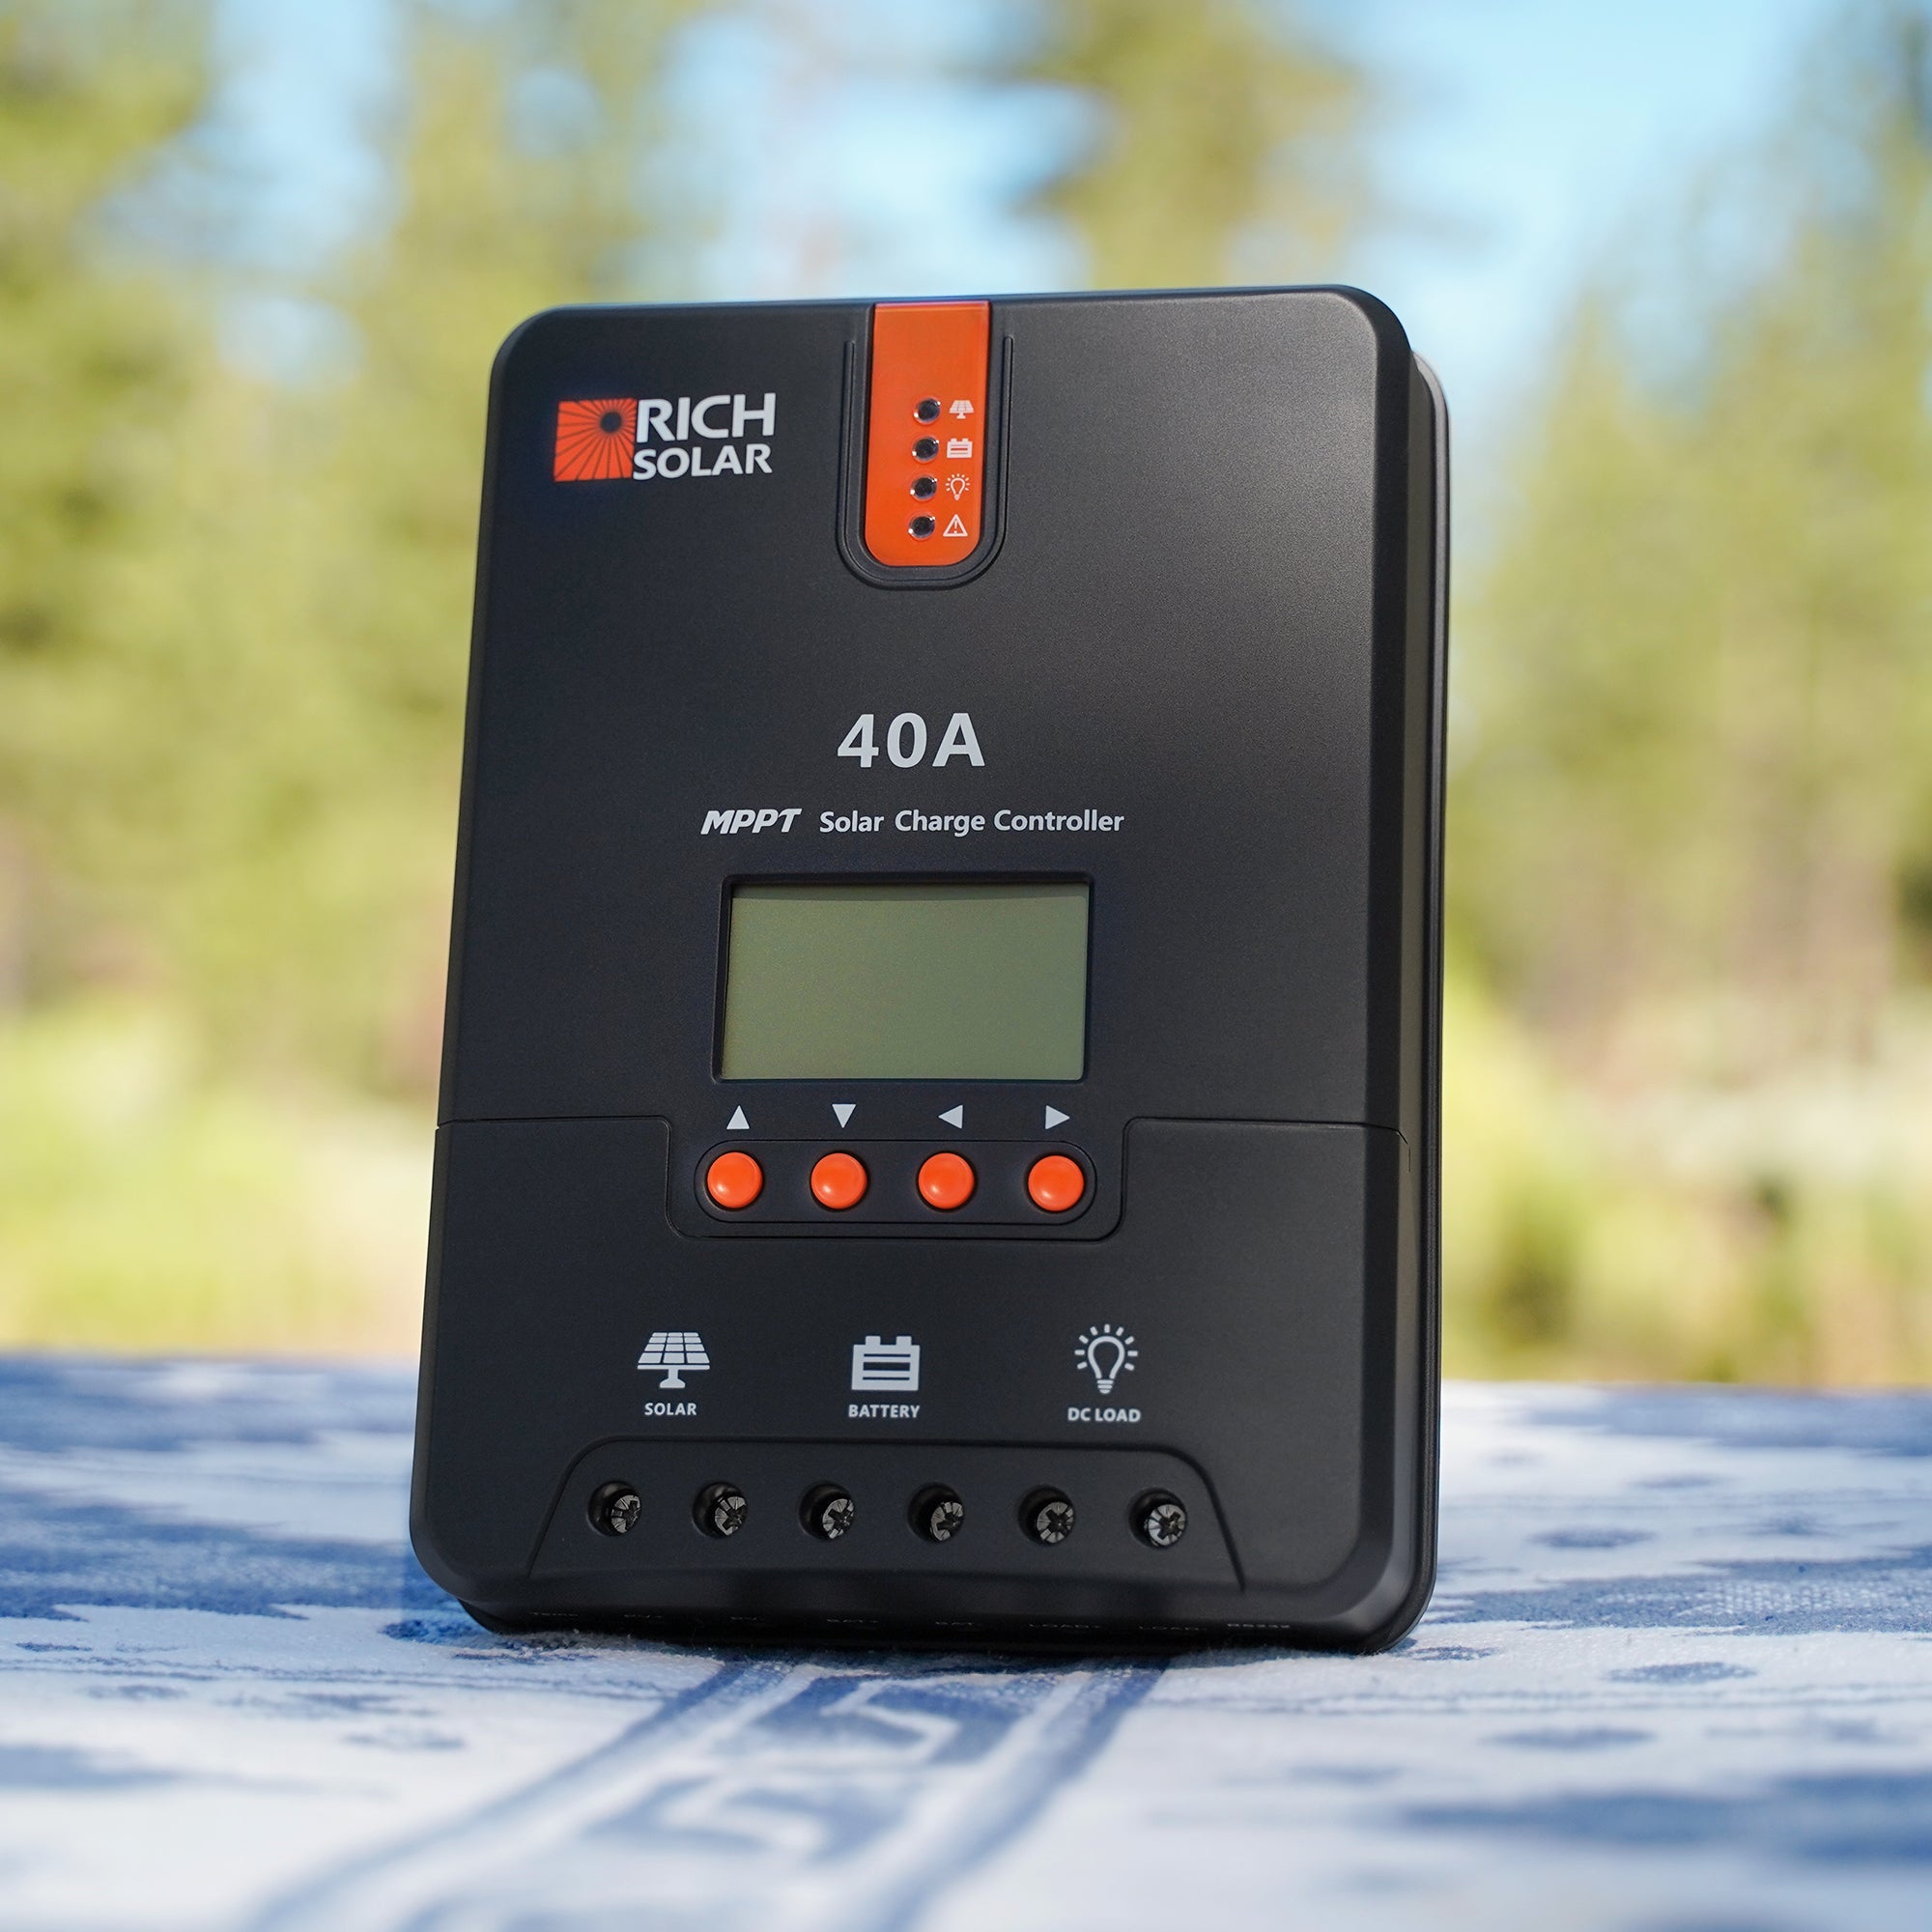 RICH SOLAR 40A MPPT Solar Charge Controller - Solar Generators and Power Stations Plus